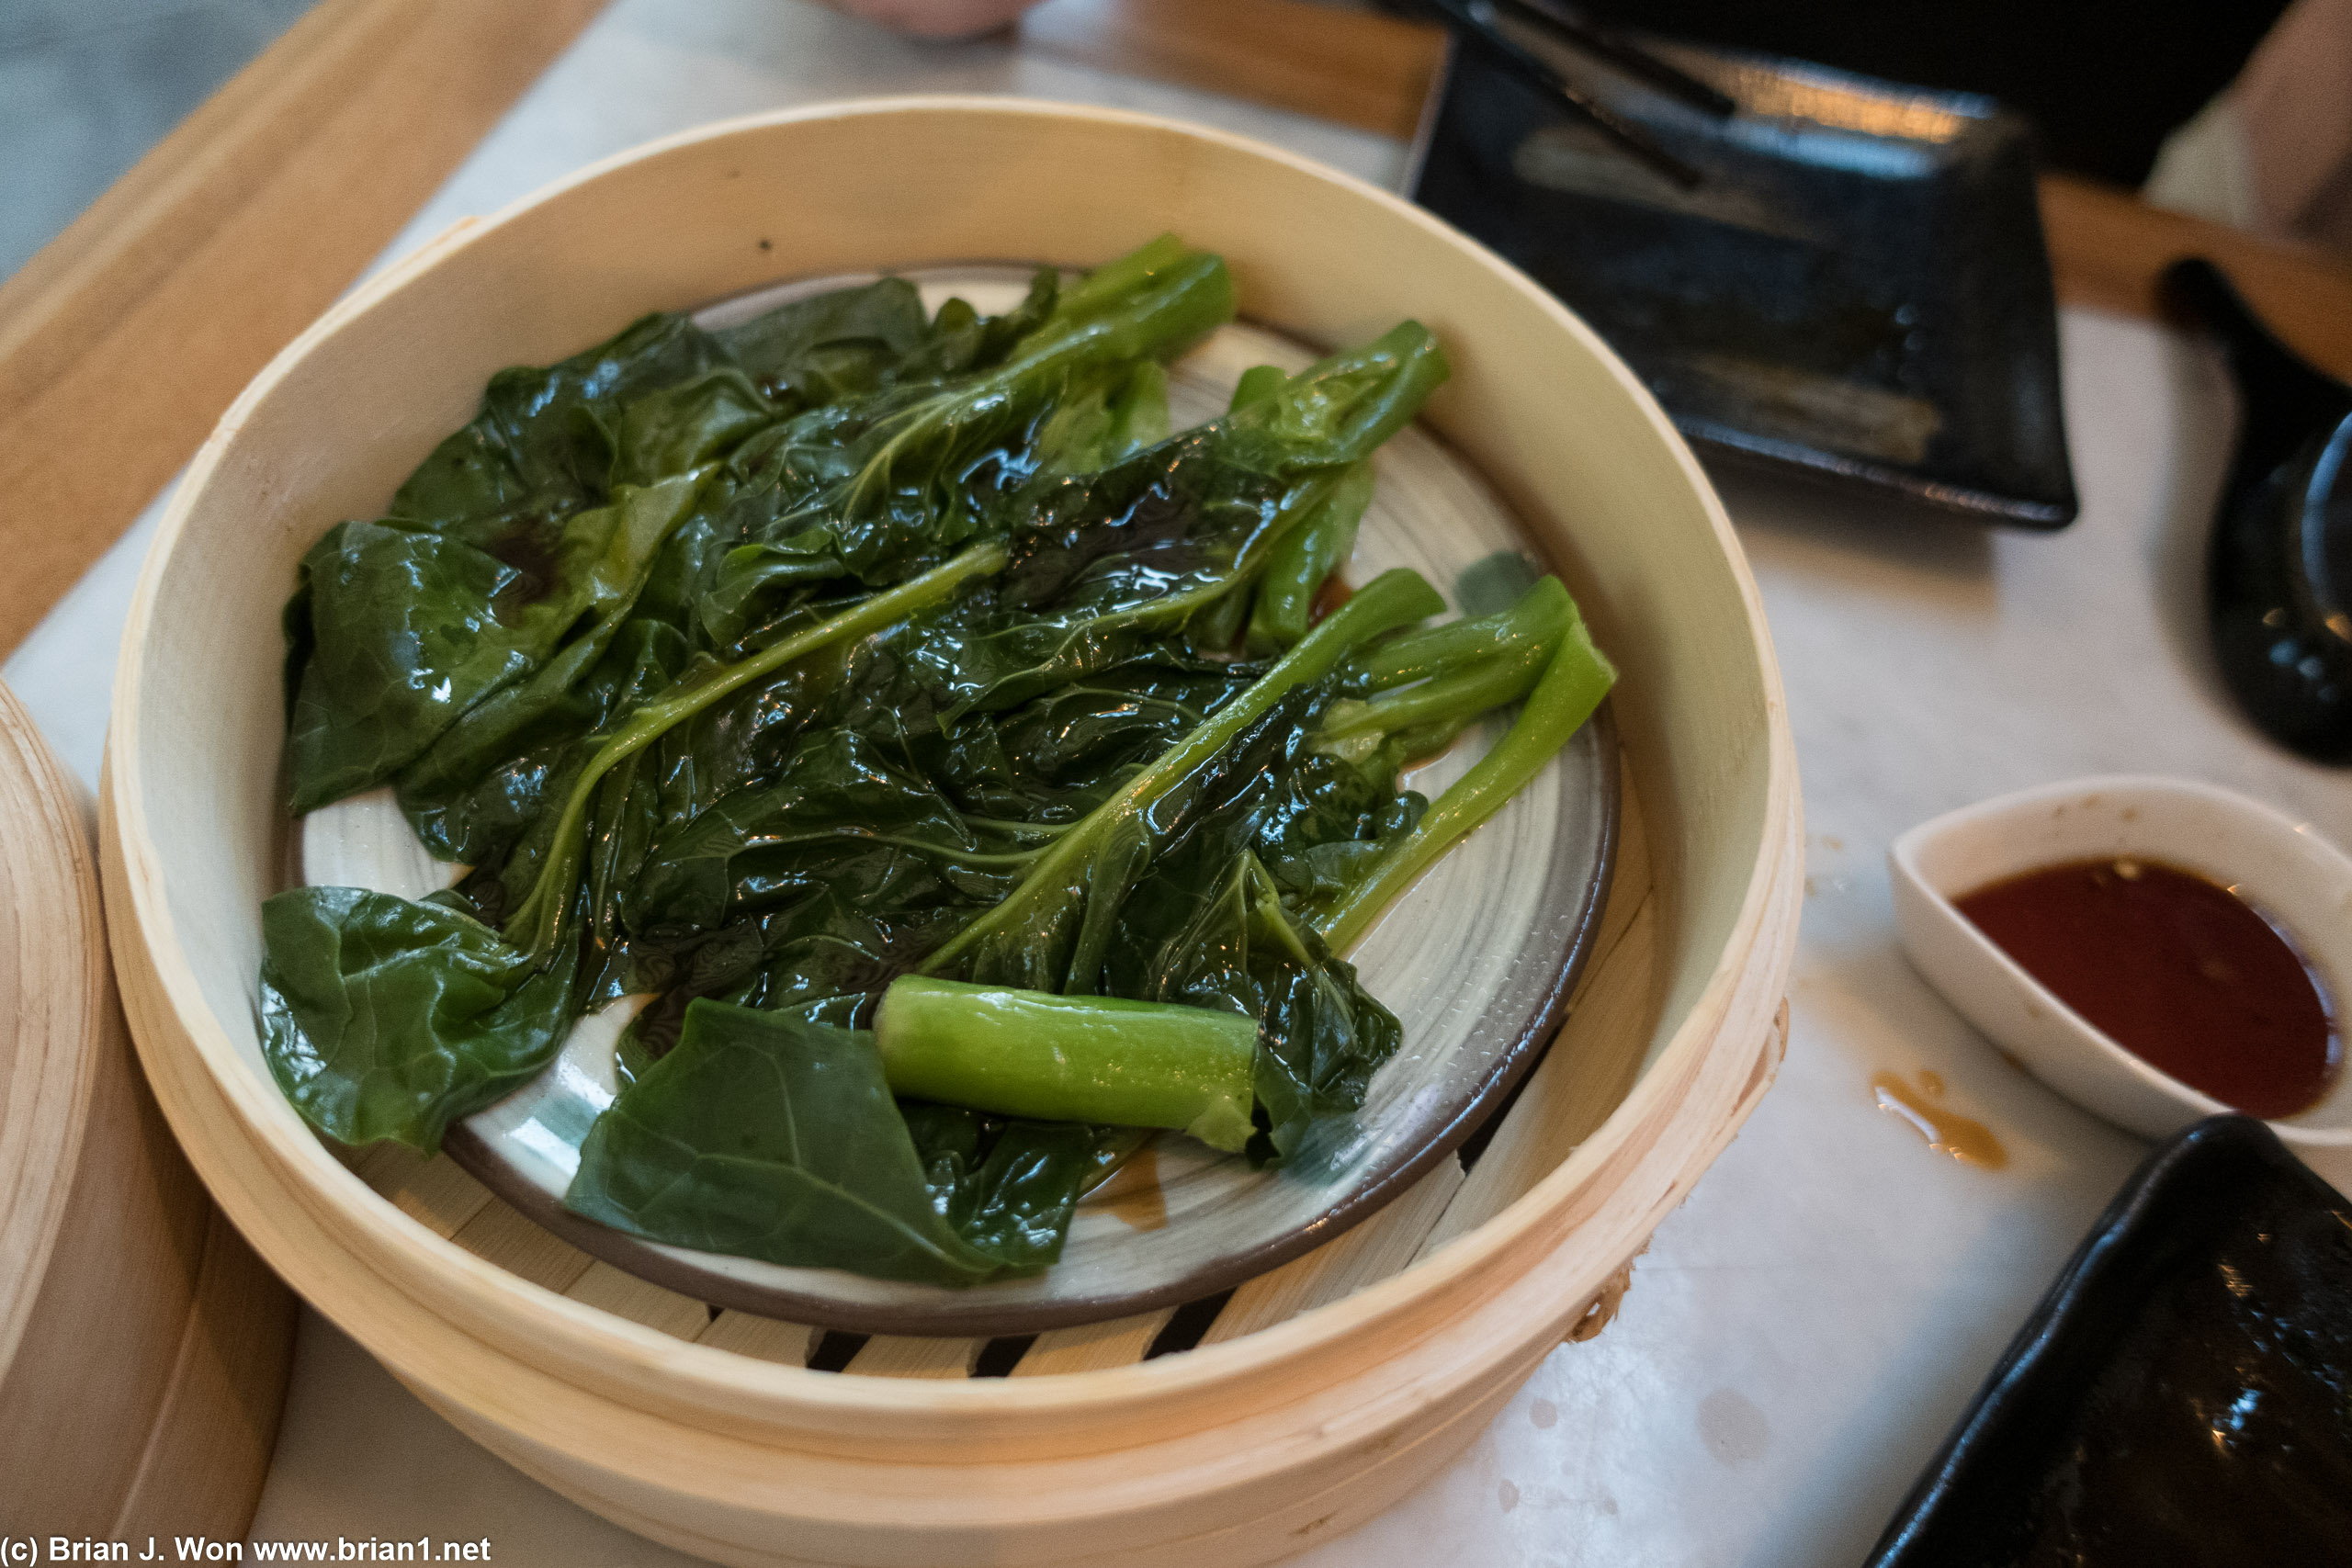 Even the gai lan portion is skimpy. Thwy were also on the verge of being overcooked-- but not quite!